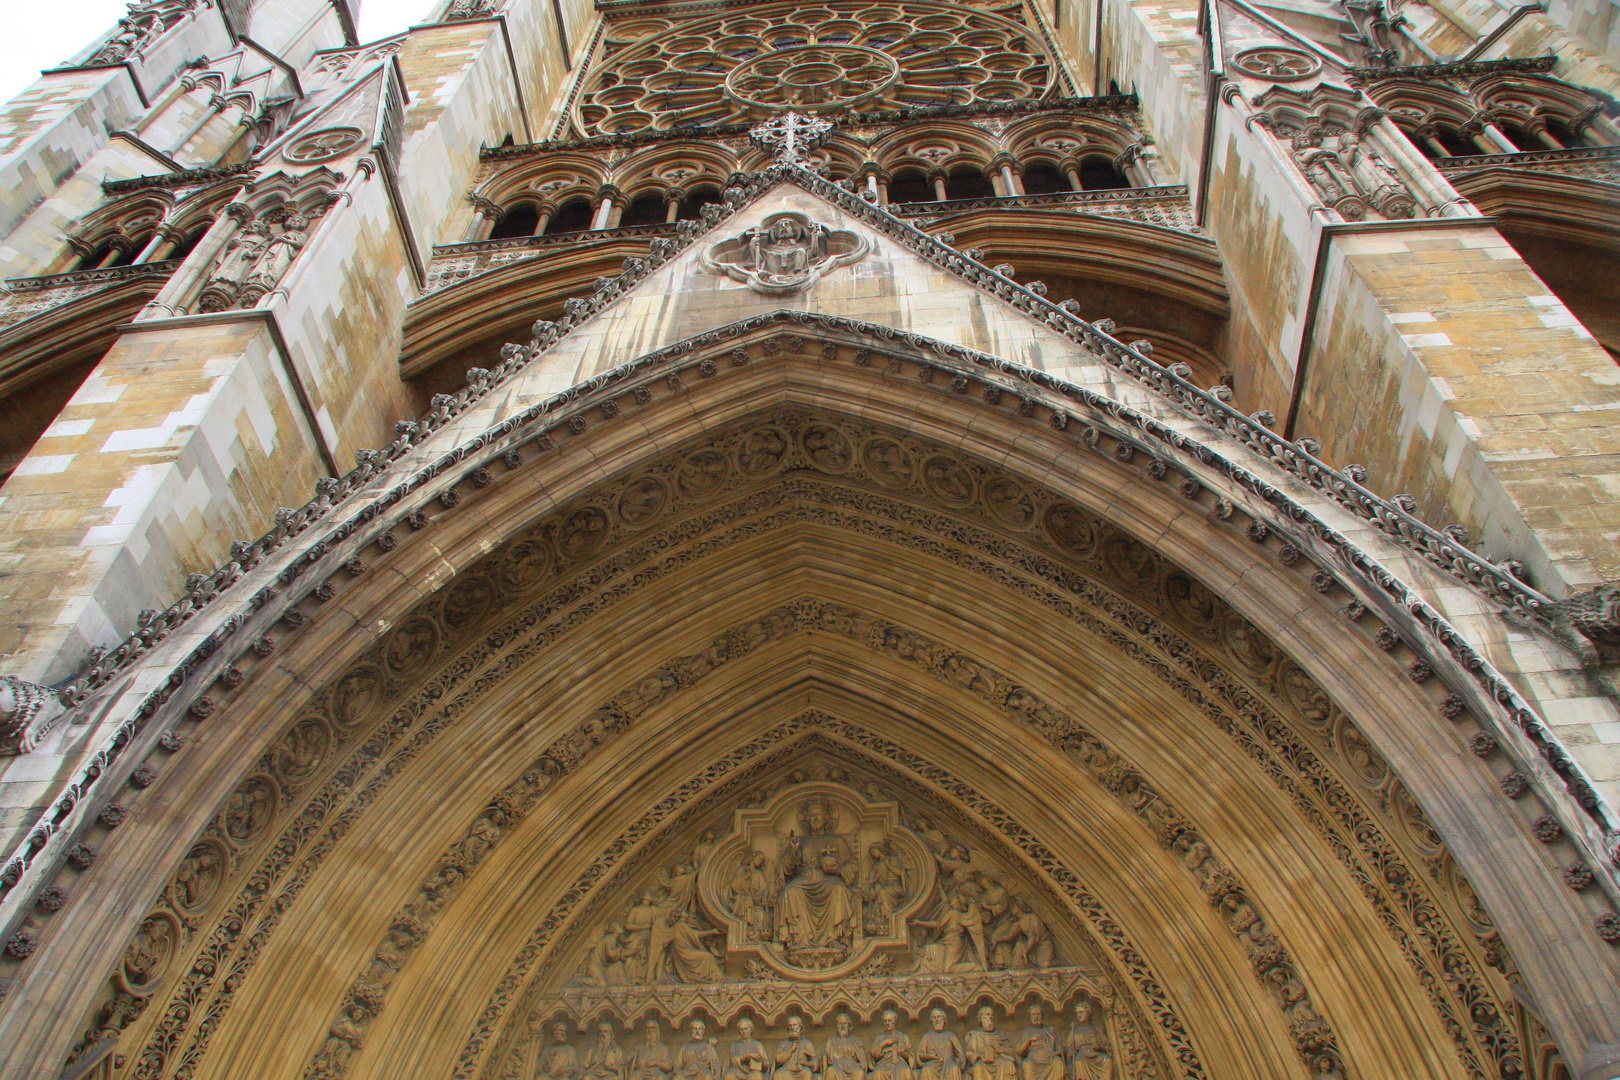 The WestMinster Abbey ...